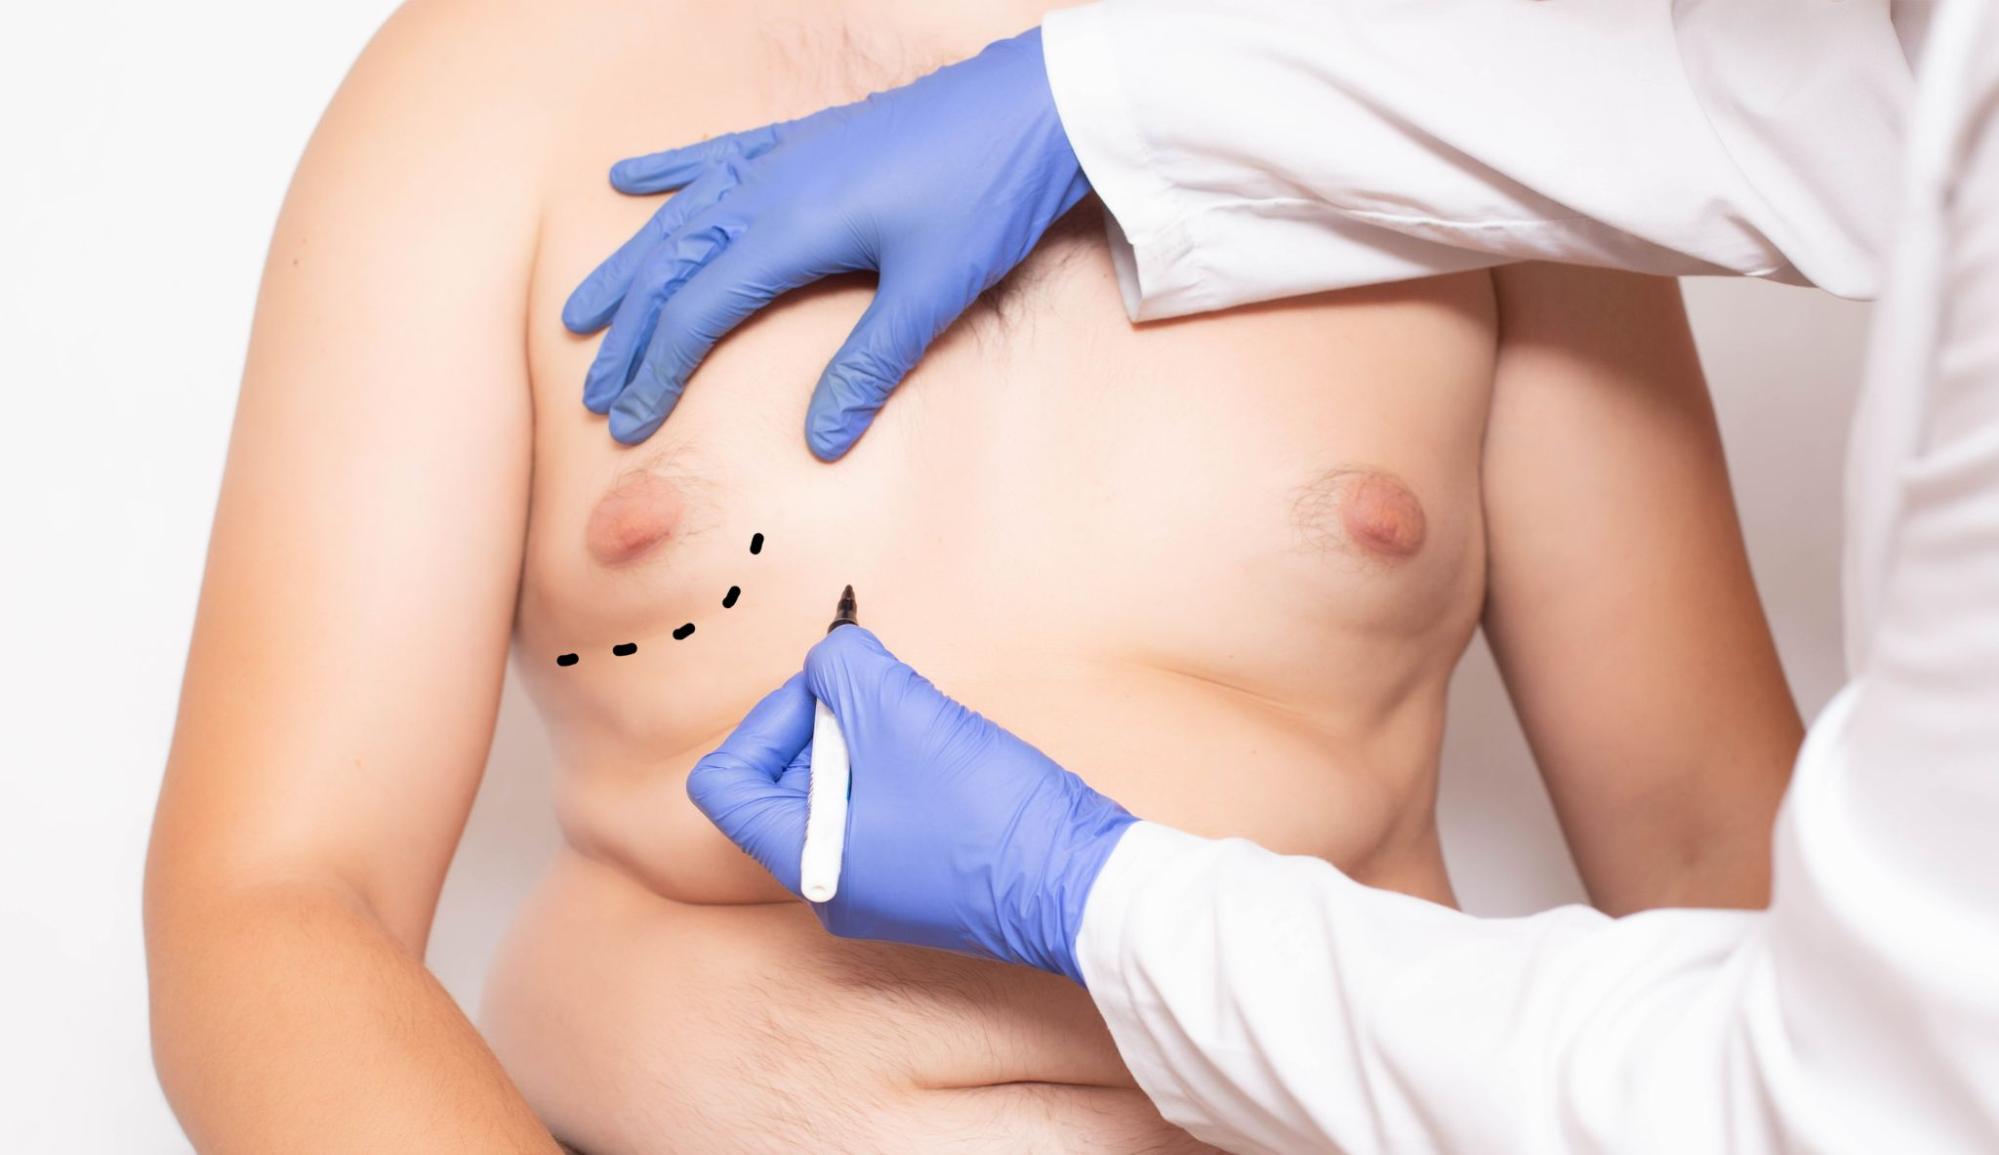 A Comprehensive Look at the Types of Gynecomastia Tissue